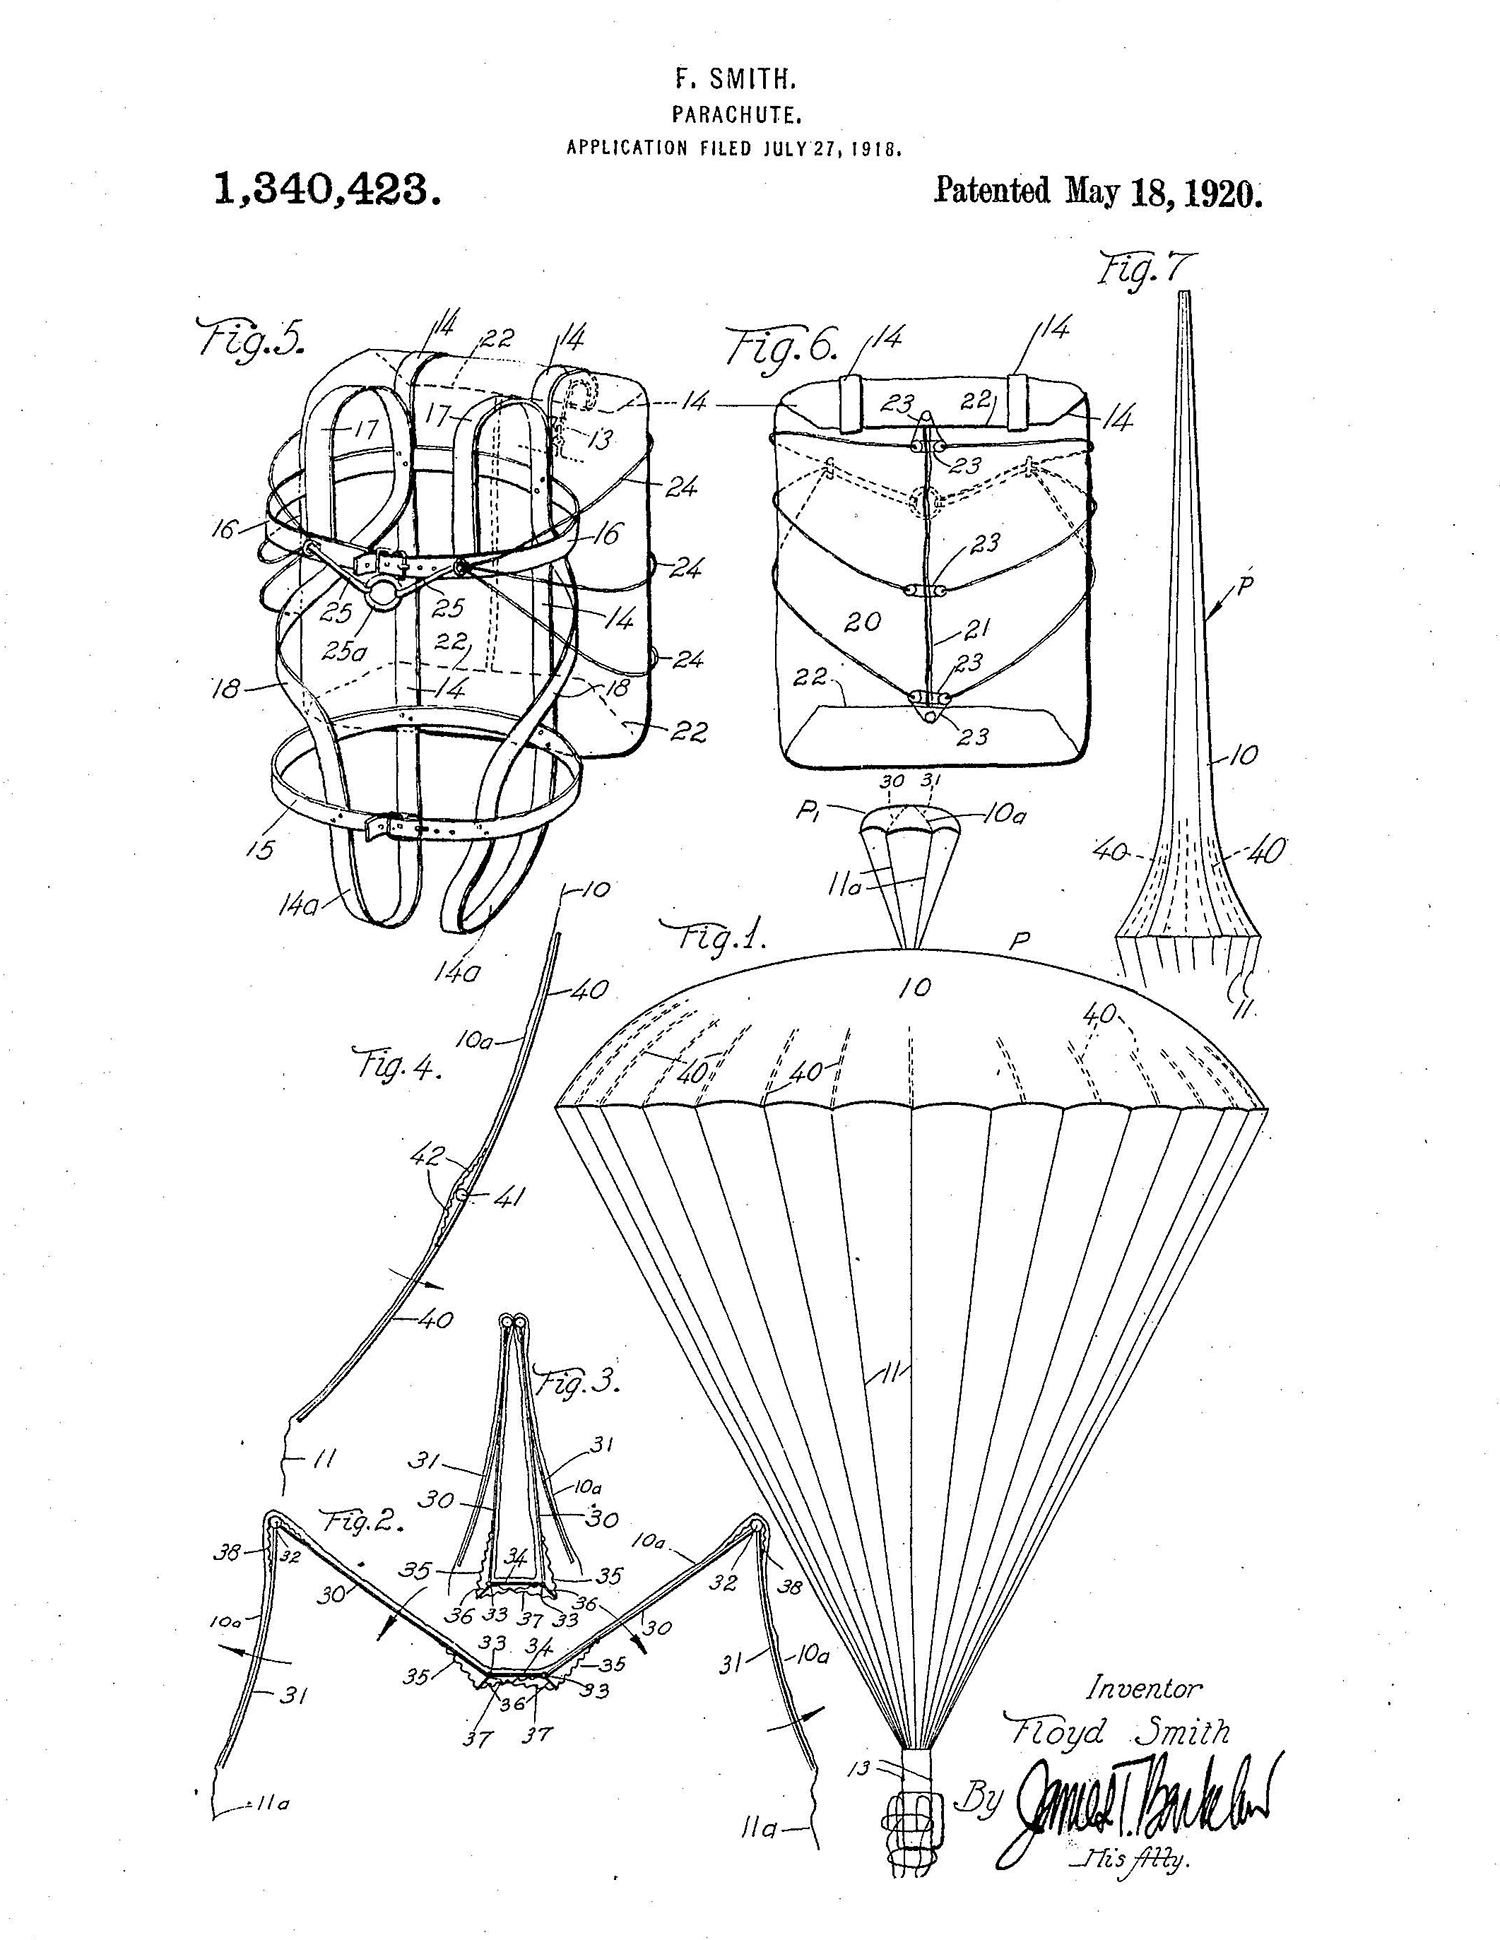 Patent drawing for Floyd Smith's first manually operated parachute